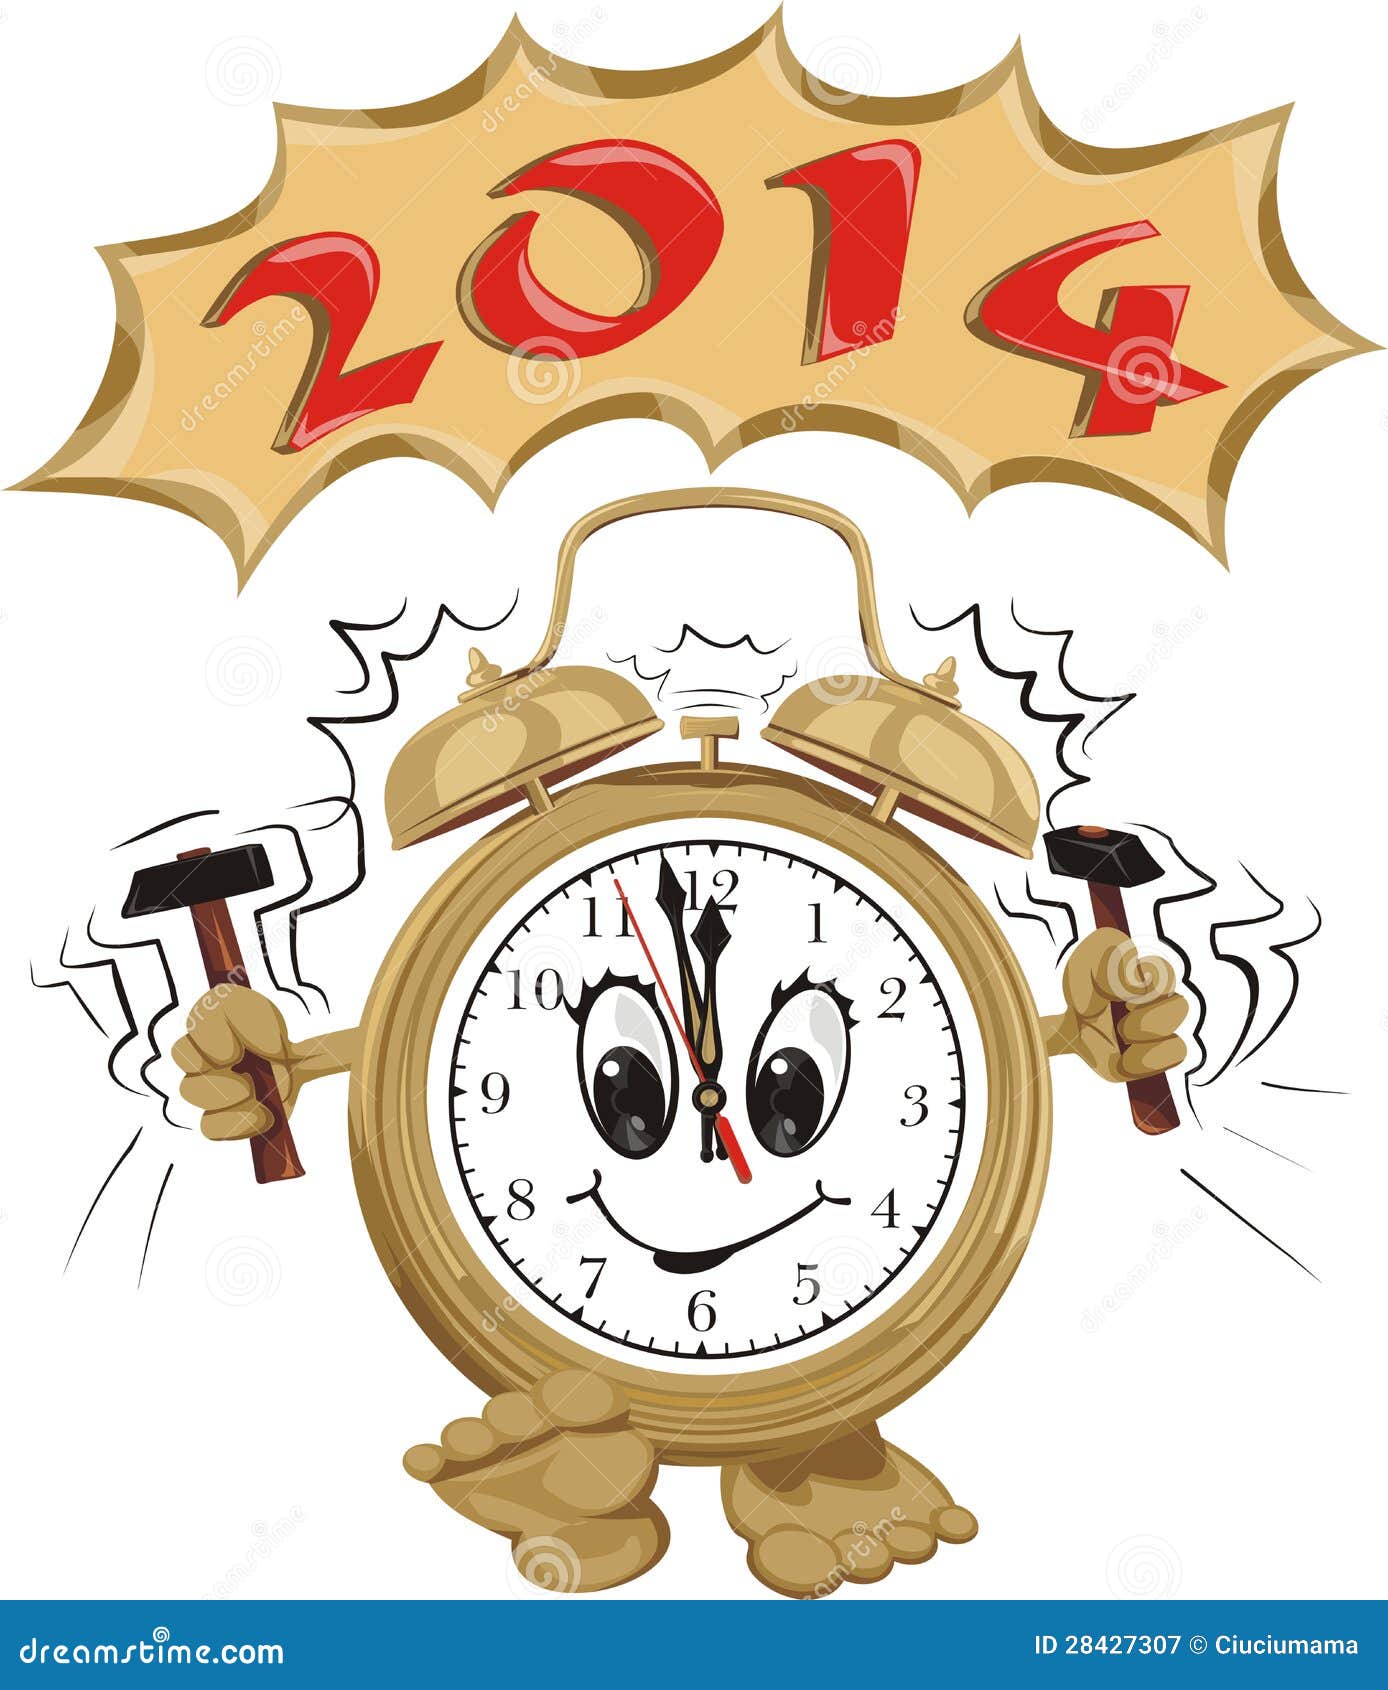 free animated clipart happy new year 2014 - photo #24